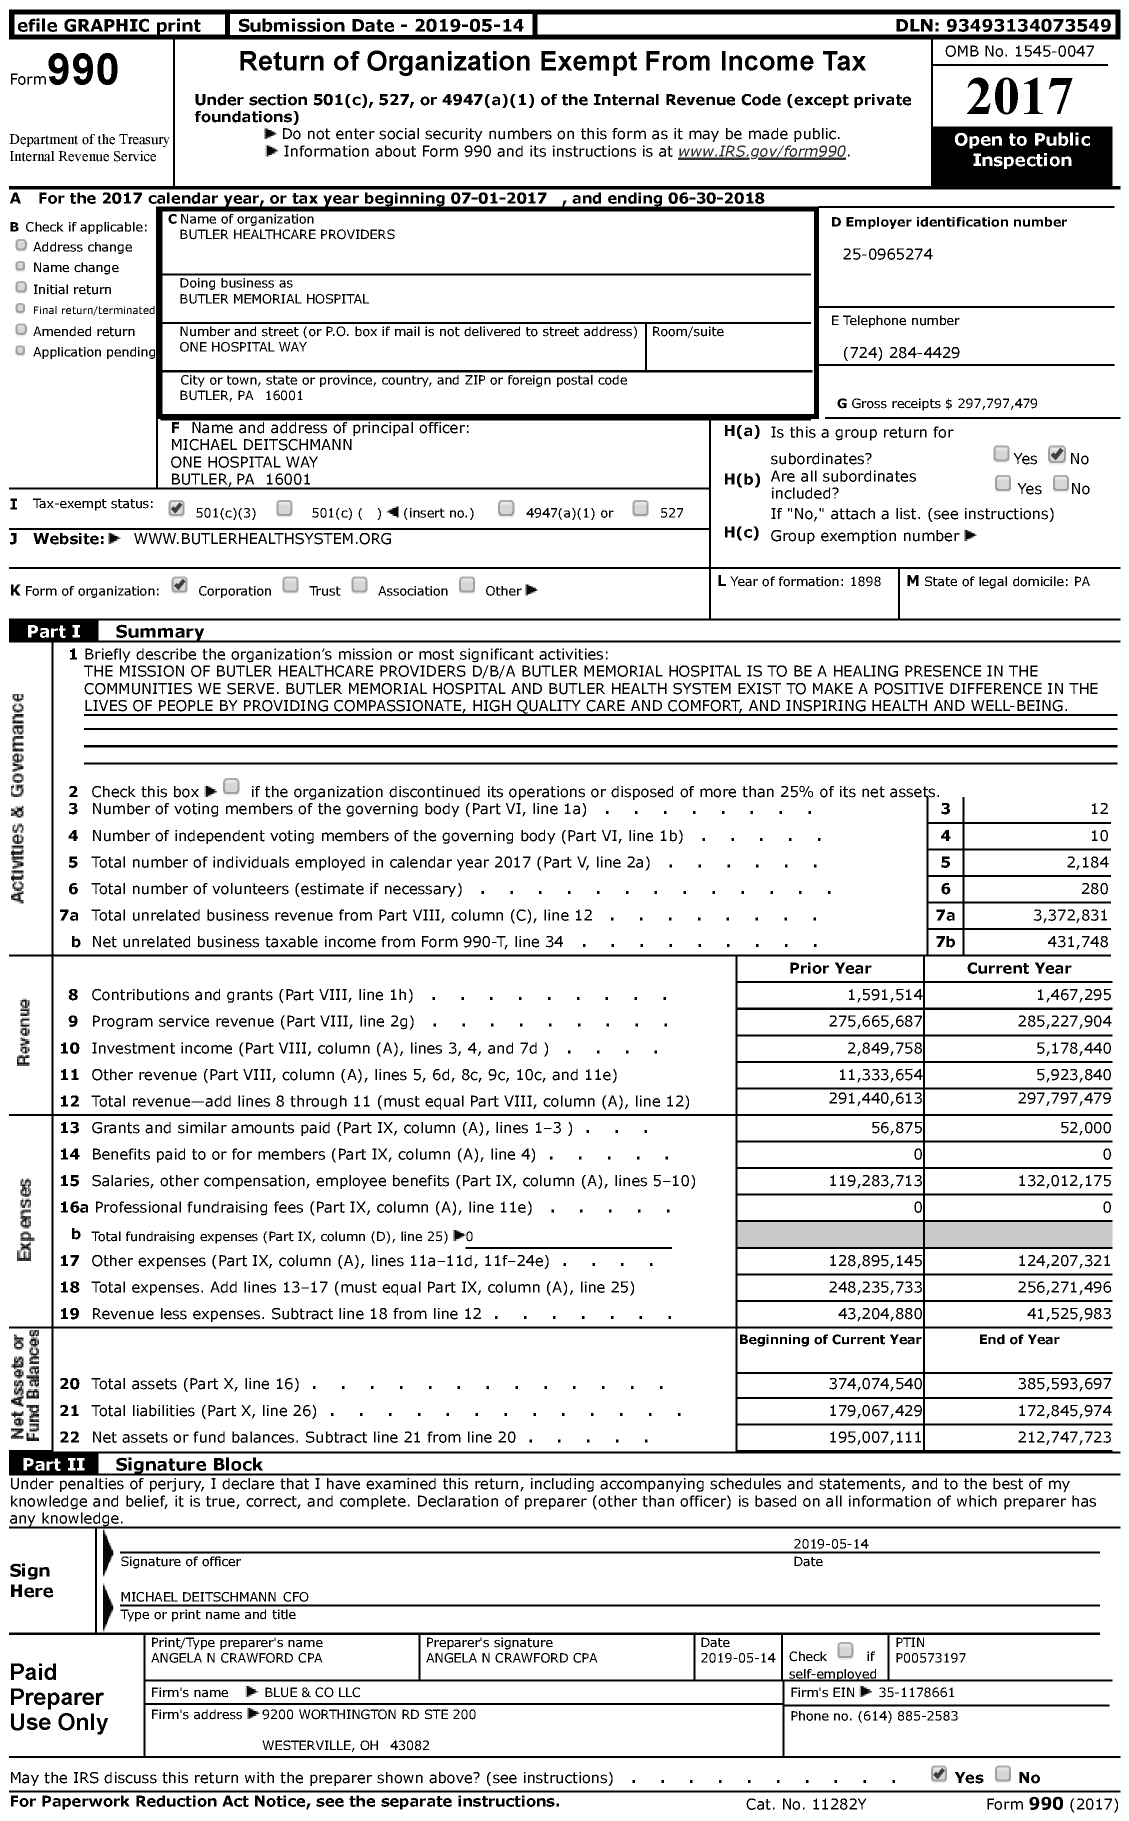 Image of first page of 2017 Form 990 for Butler Health System (BHS)